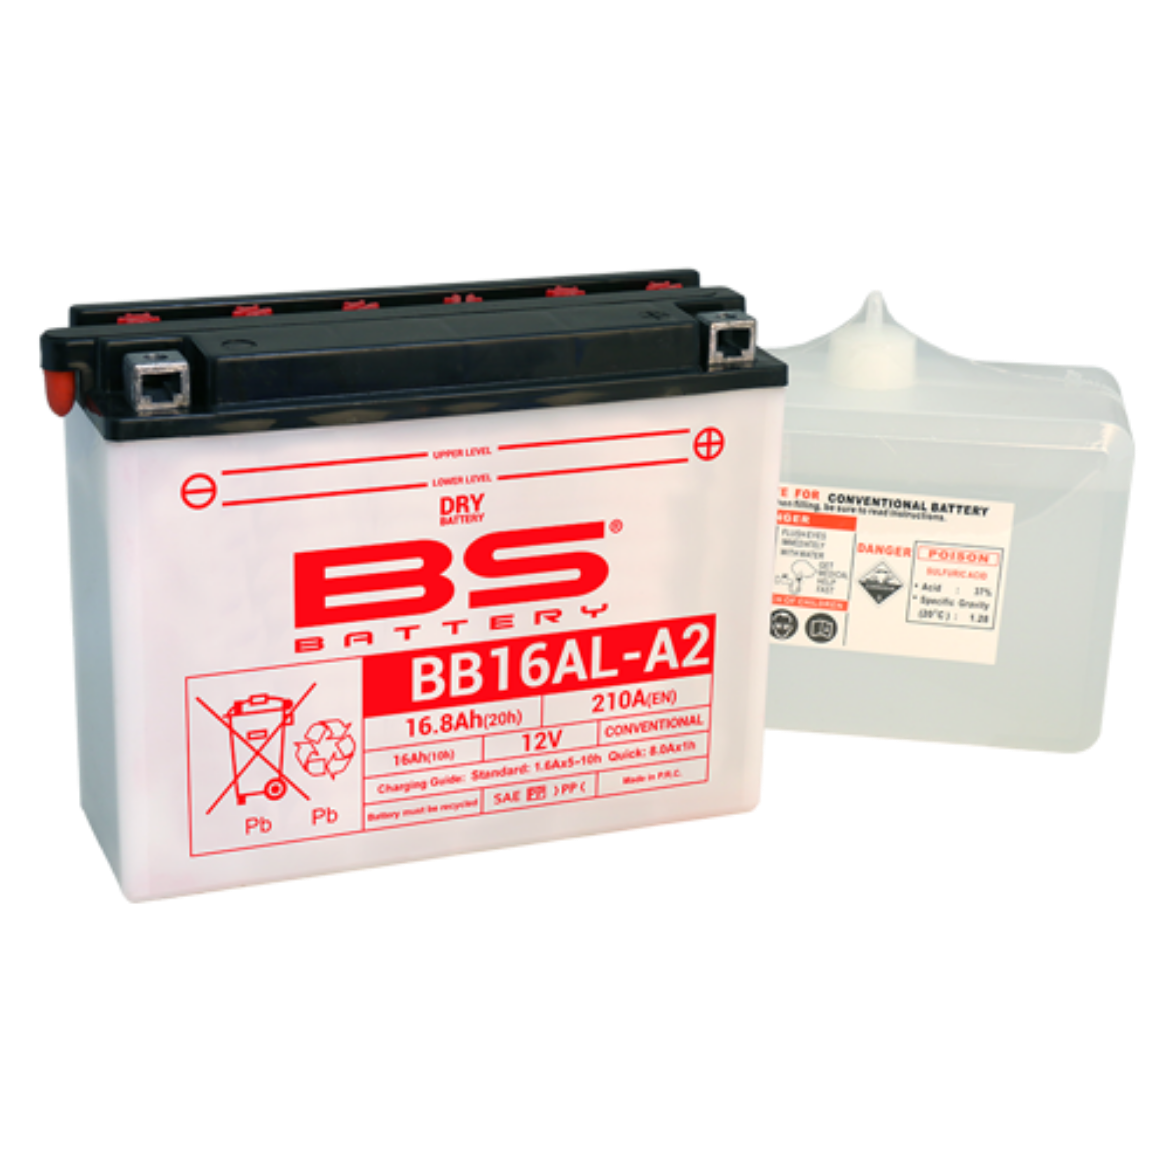 Picture of BB16AL-A2 12V 16AH 210CCA DRY CONVENTIONAL BS MOTORCYCLE BATTERY - RHP